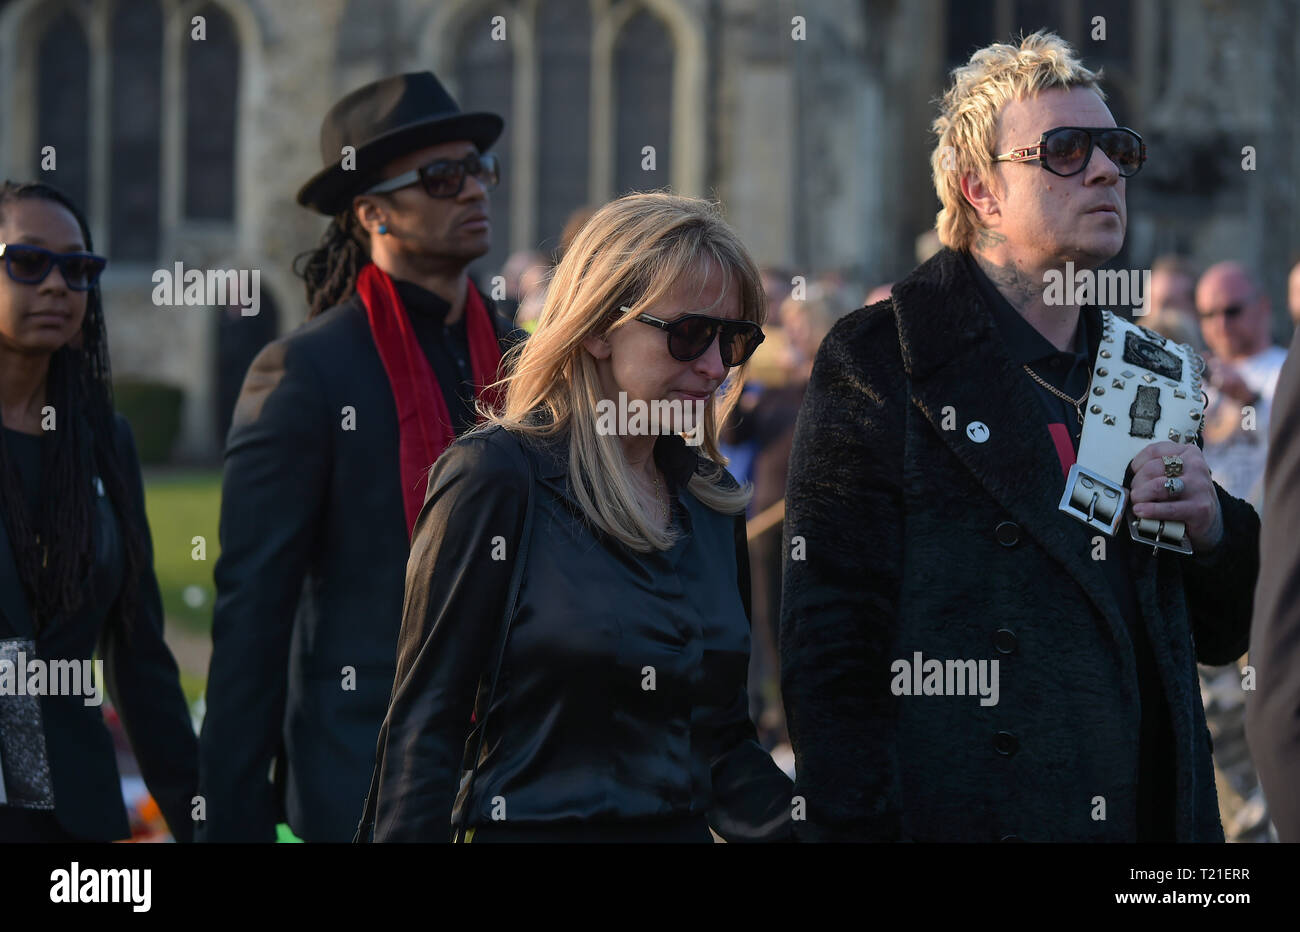 Bocking, Essex, UK. 29th Mar 2019. Band mate Liam Howlett with wife Natalie Appleton and Keith Palmer Maxim with red scarf  arrive at The Funeral of Keith Flint lead singer of The Prodigy takes place at St Mary's Church in Bocking near Braintree Essex. Flint was found dead at his home in North End Essex aged 49 on 4th March 2019 Credit: MARTIN DALTON/Alamy Live News Stock Photo